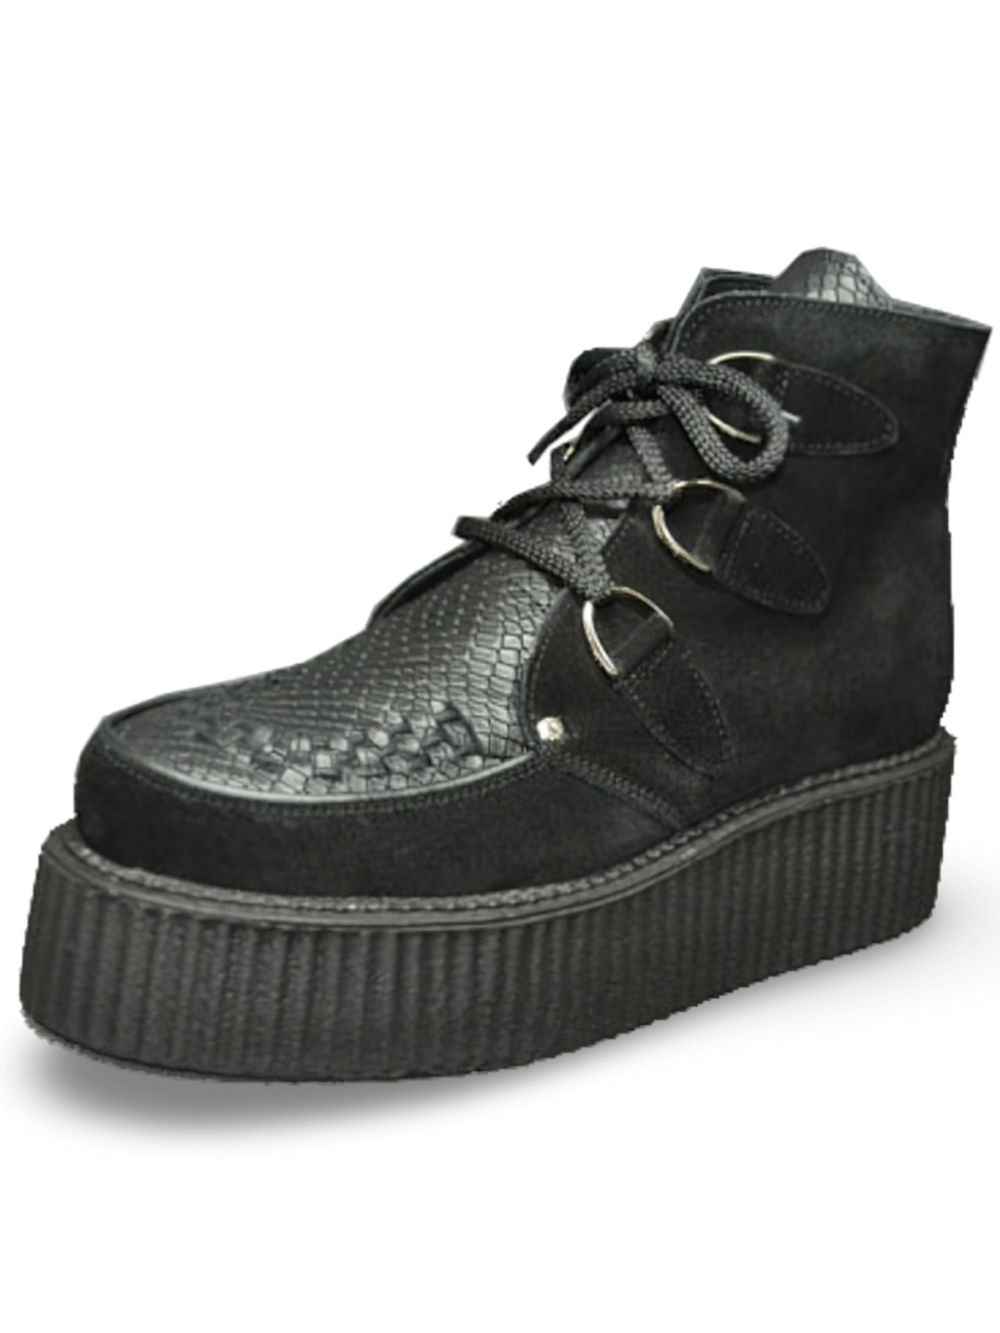 Stylish Black Suede And Snake Leather Creepers